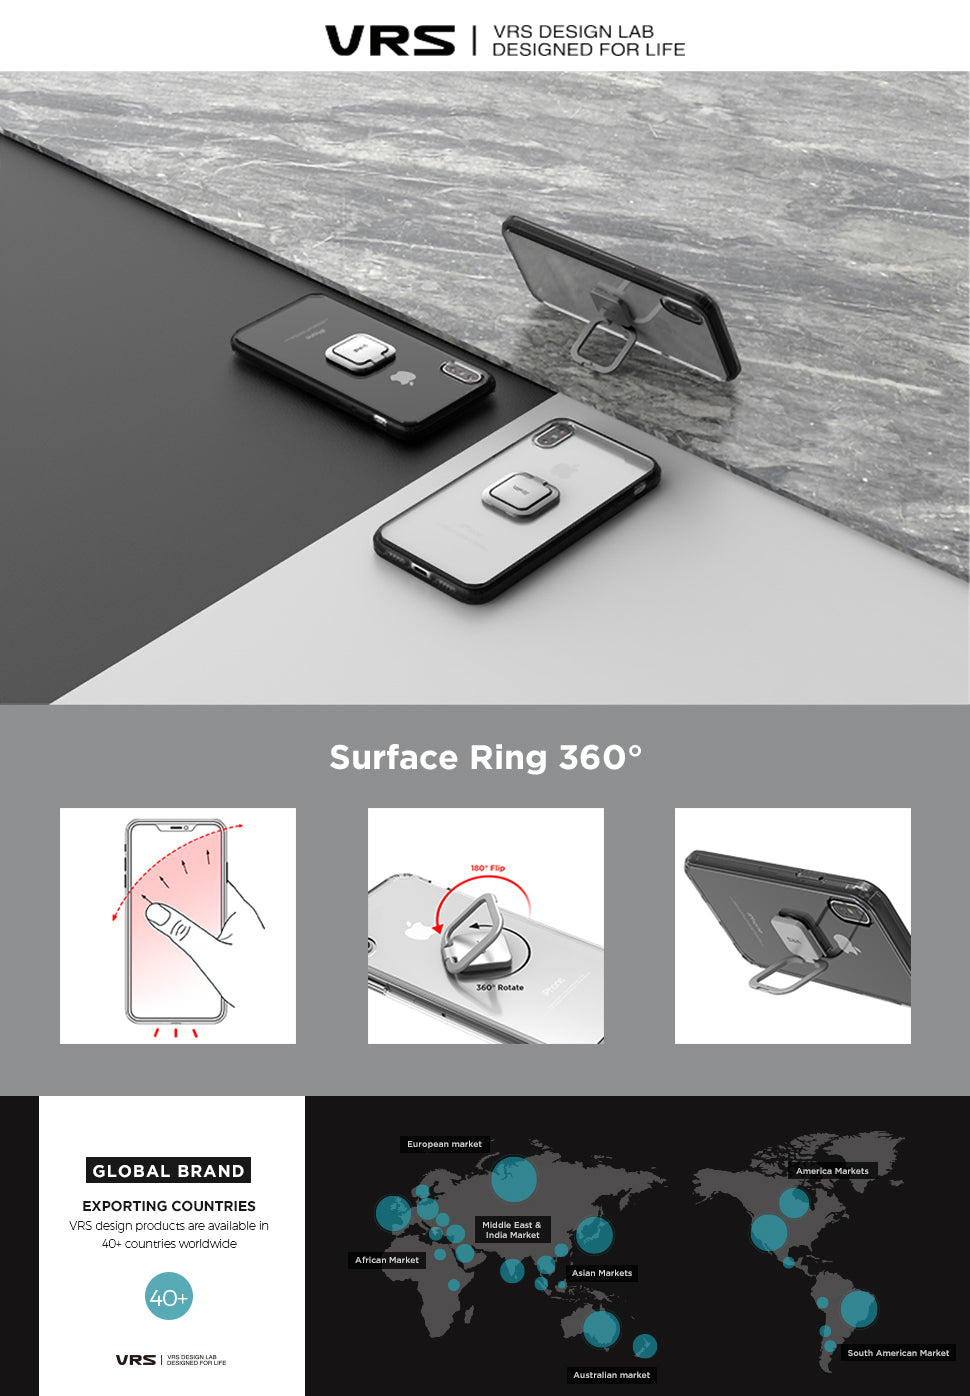 Surface Ring 360° from VRS Design